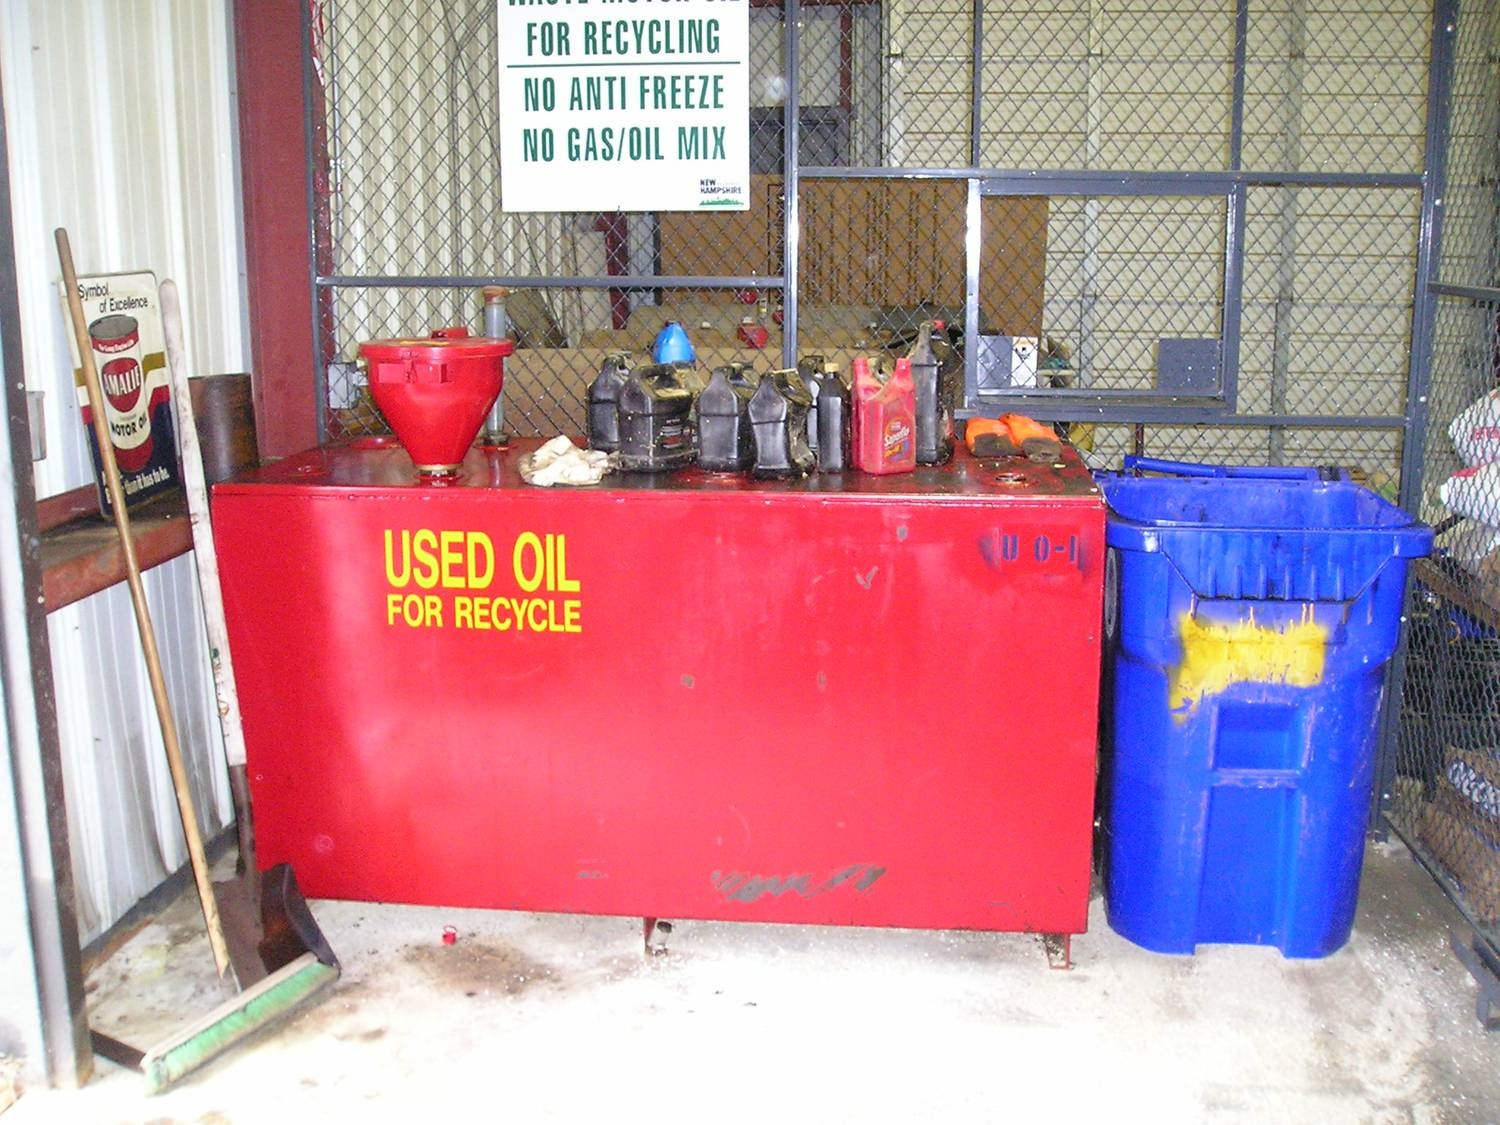 containers of used oil for recycling